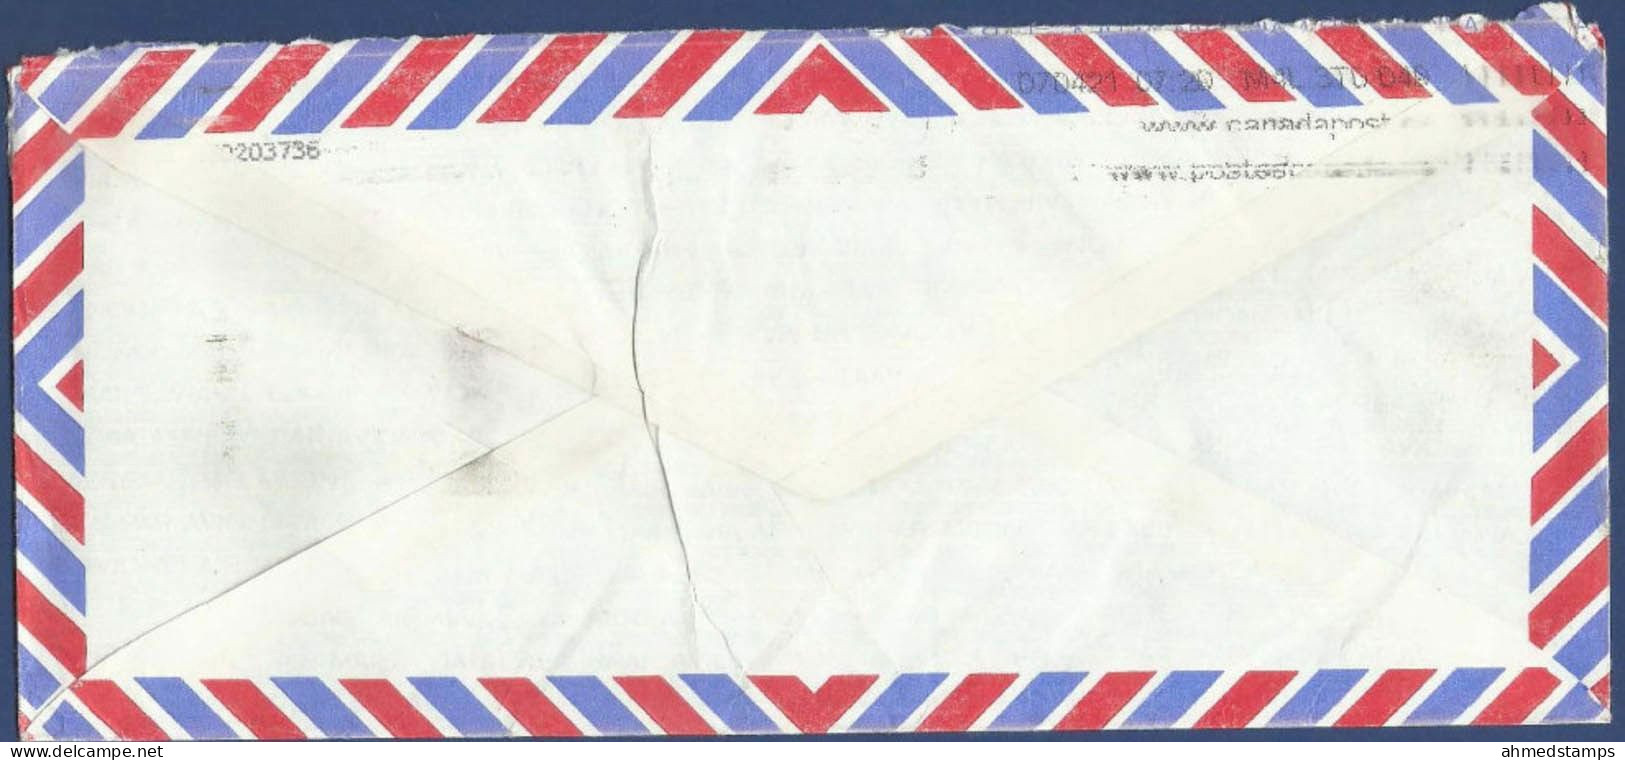 CANADA POSTAL USED AIRMAIL COVER TO UK UNITED KINGDOM - Airmail